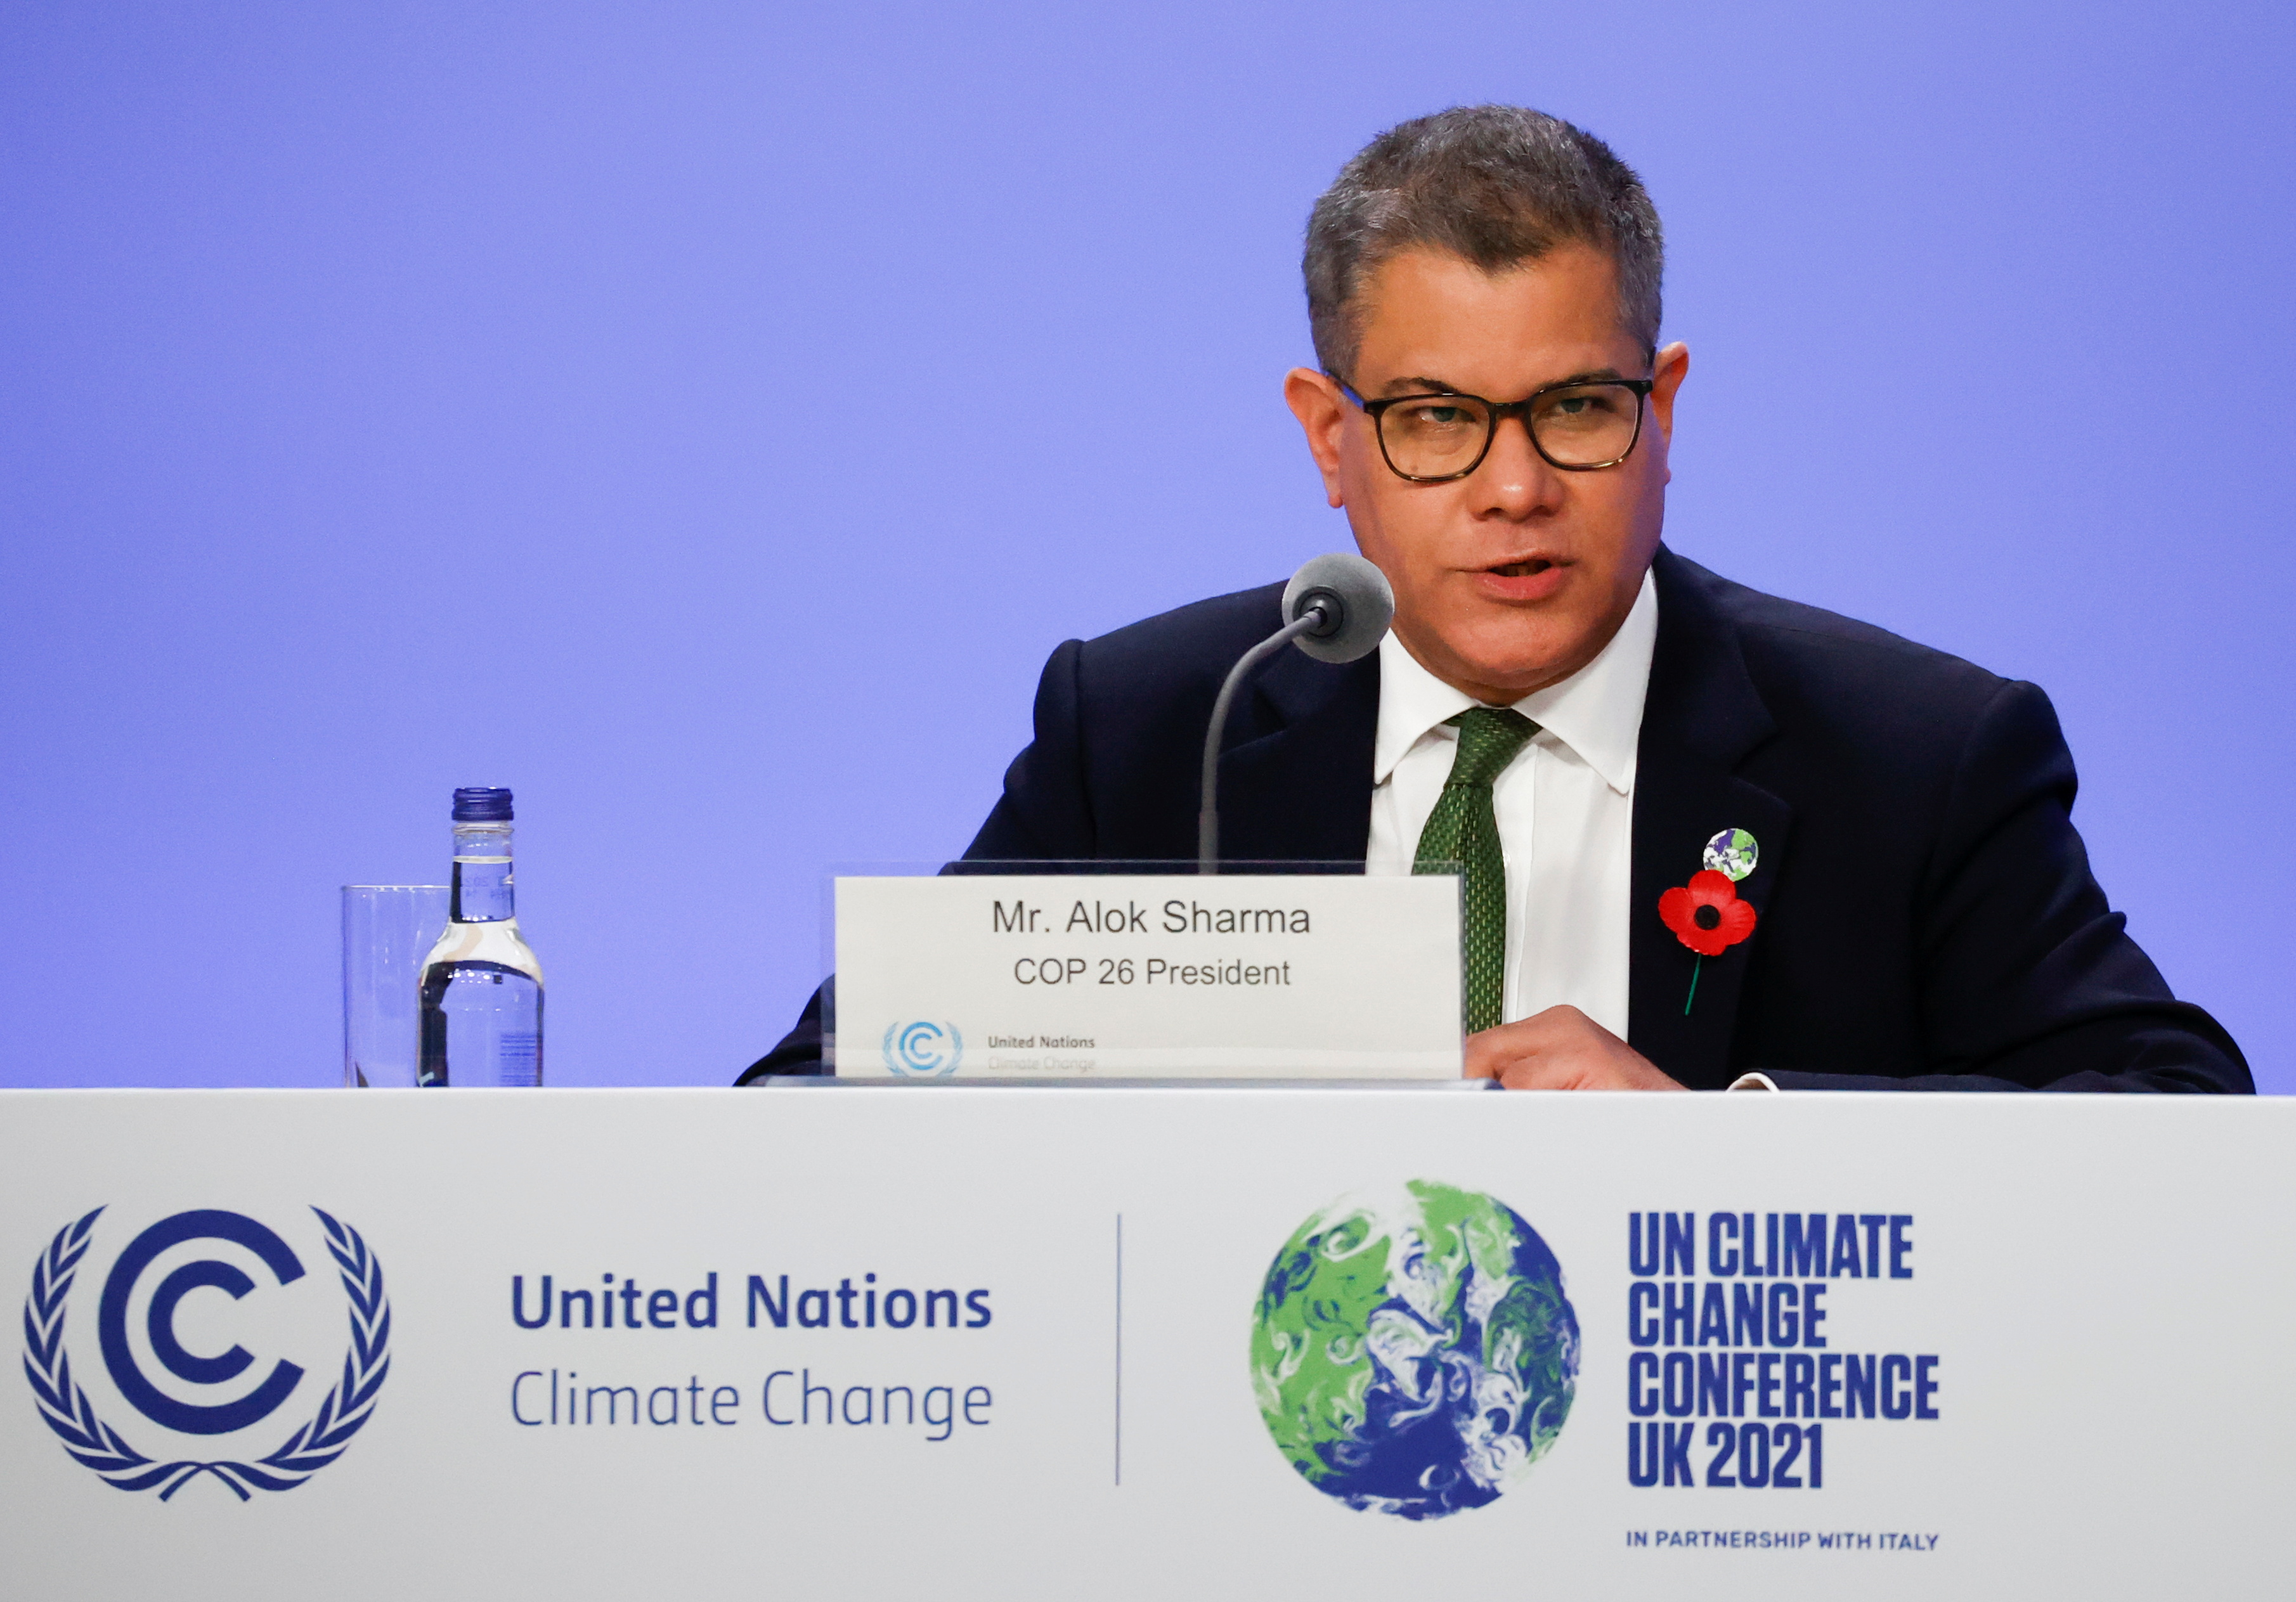 Britain's COP26 president Alok Sharma speaks during the UN Climate Change Conference (COP26), in Glasgow, Scotland, Britain November 6, 2021. REUTERS/Phil Noble